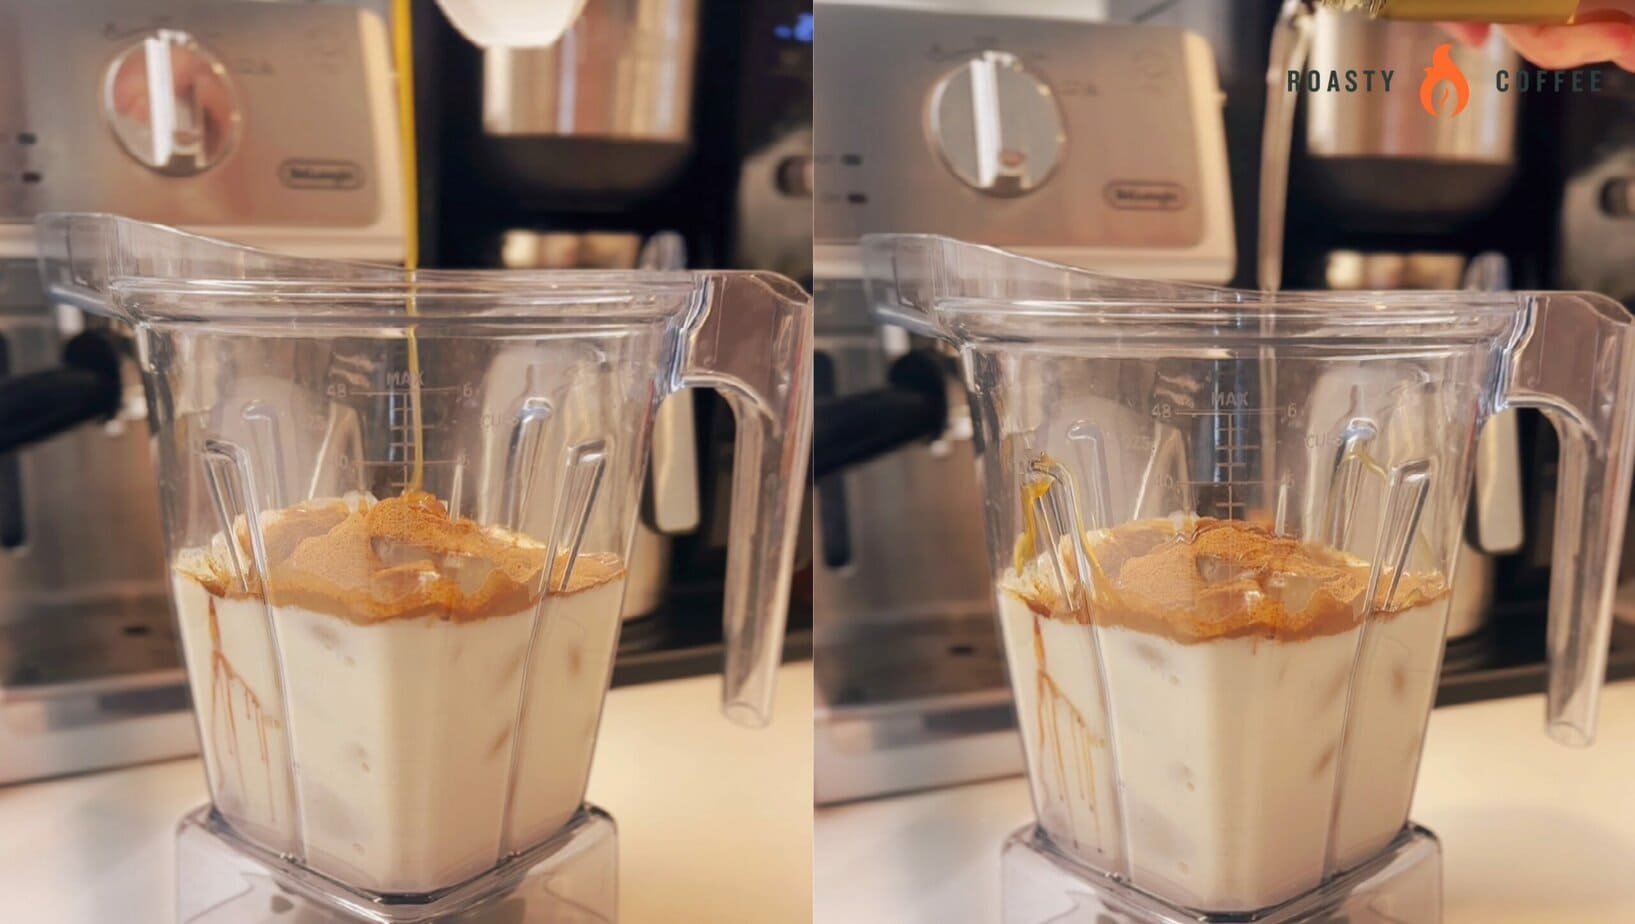 caramel sauce is added to milk and coffee in a blender